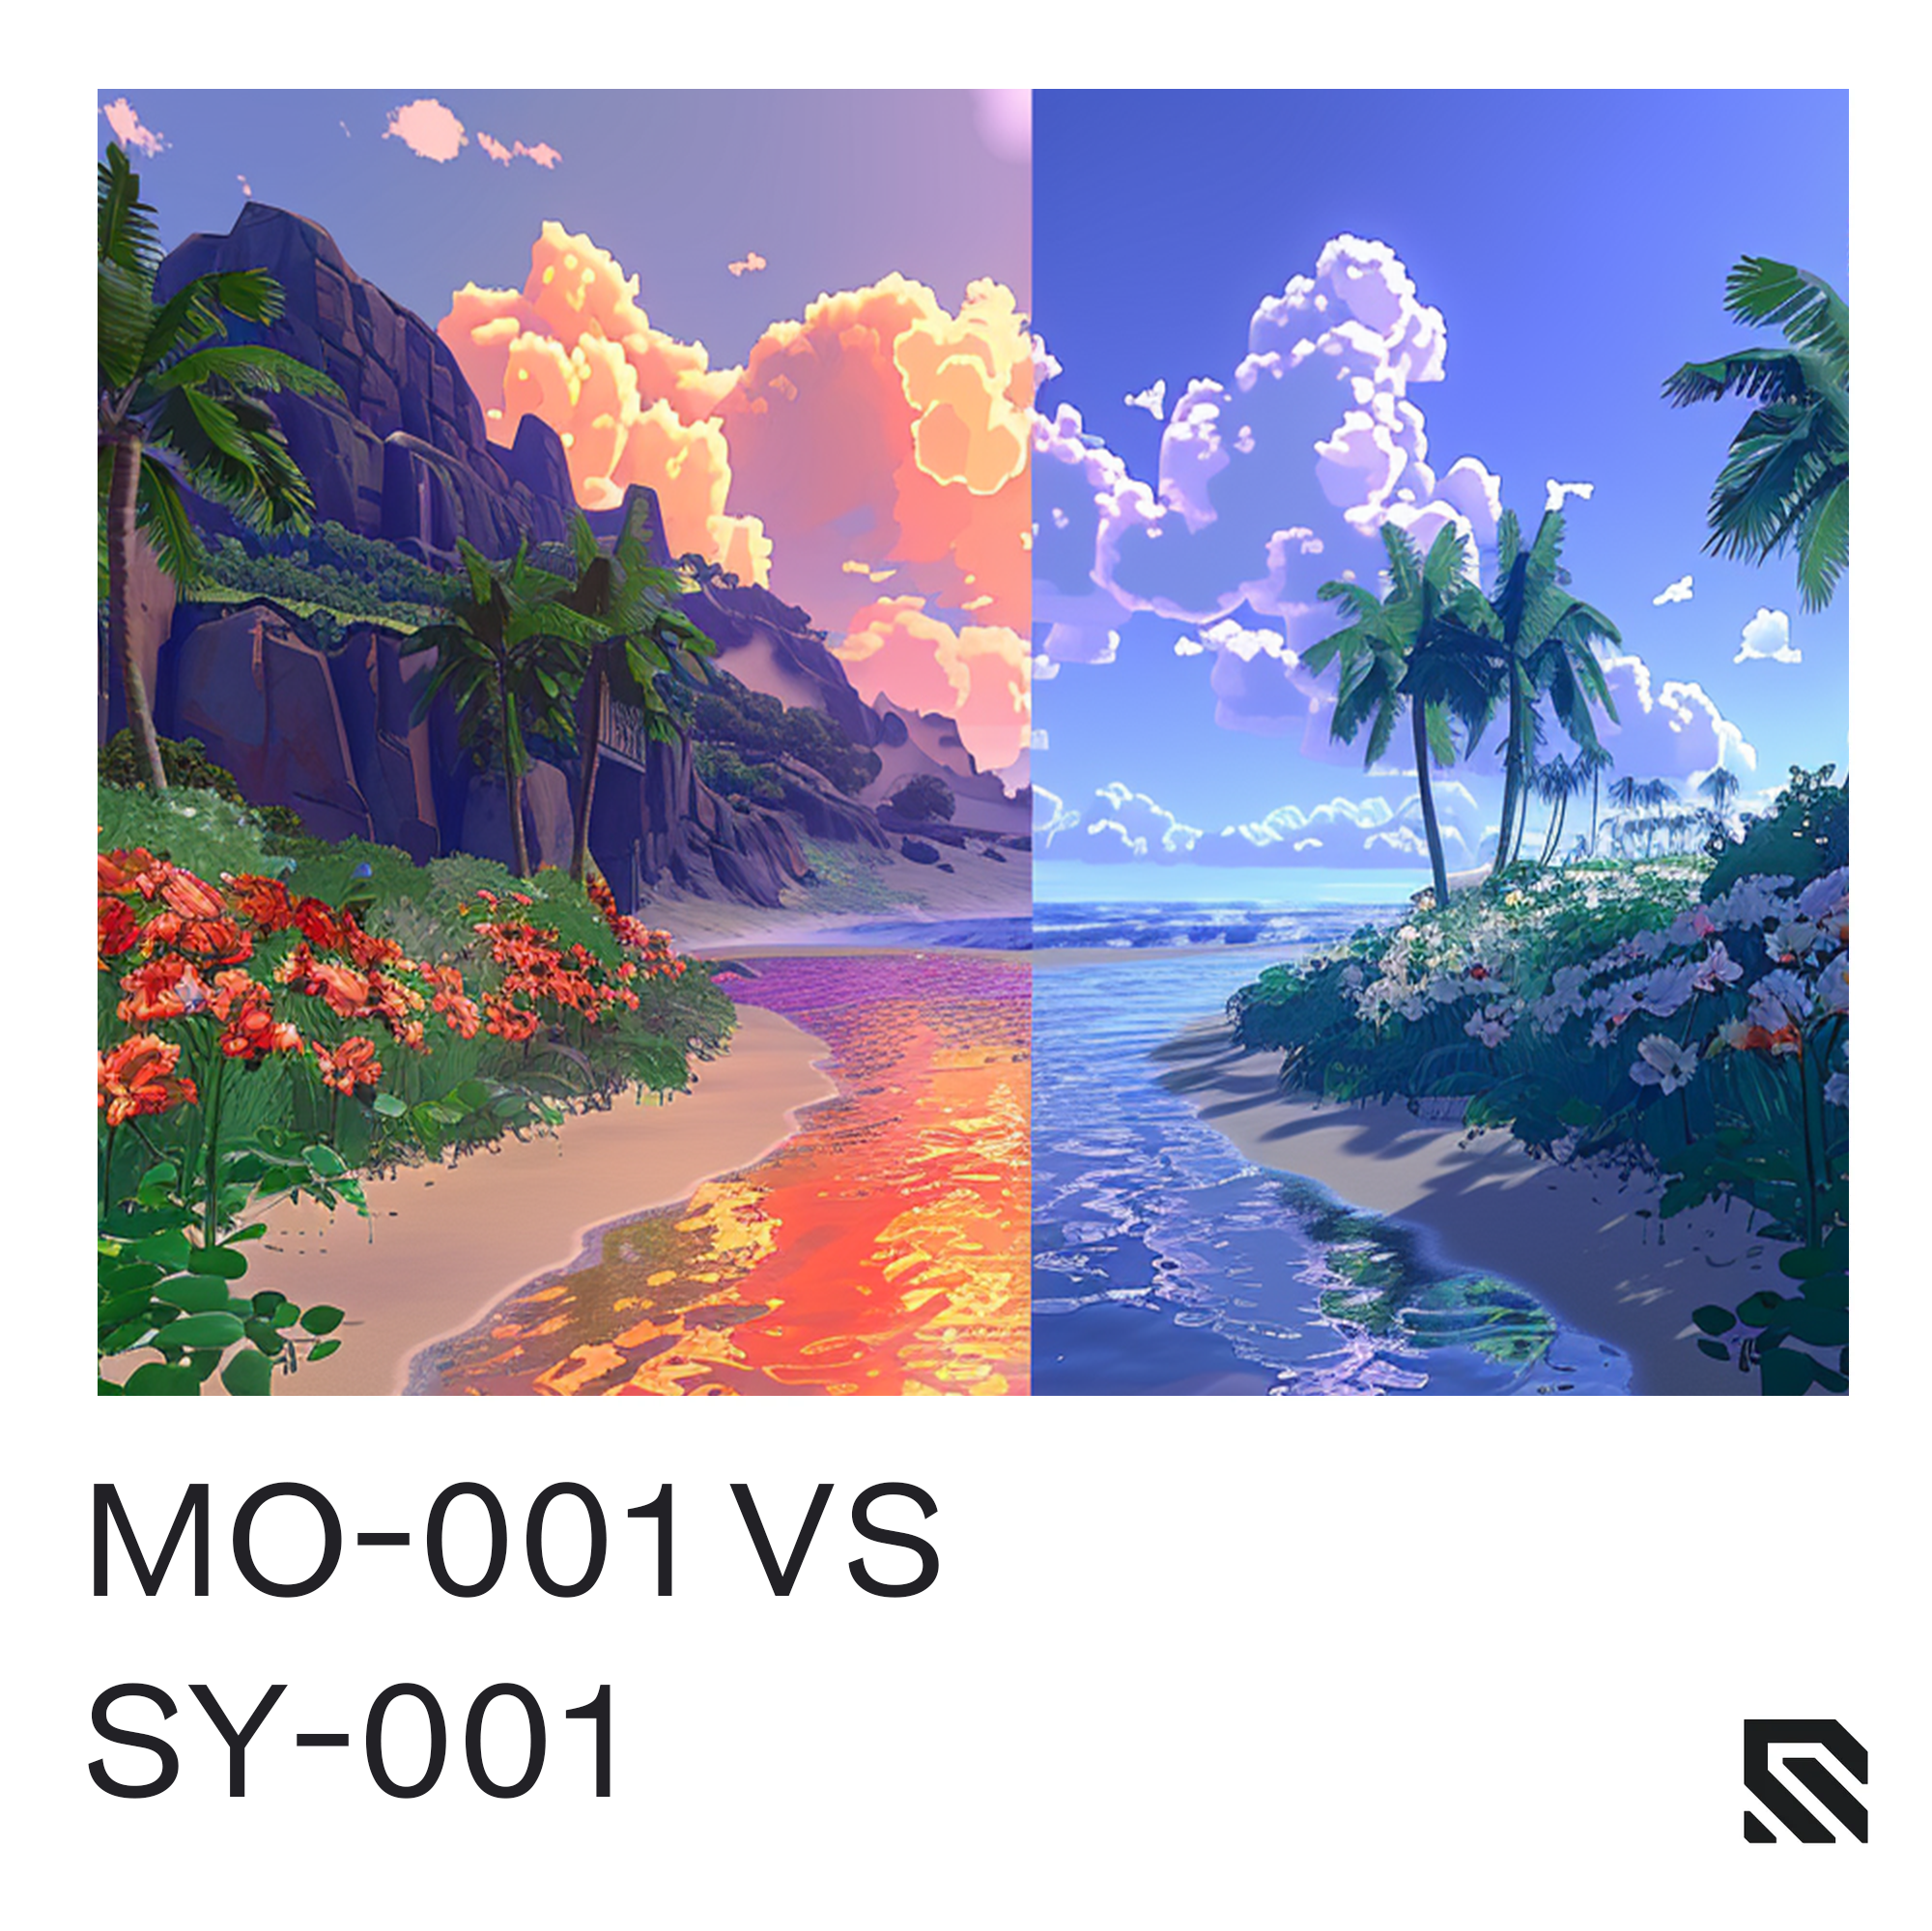 Wallhack MO-001 vs SY-001 Comparison between two environments red and blue, day and dusk